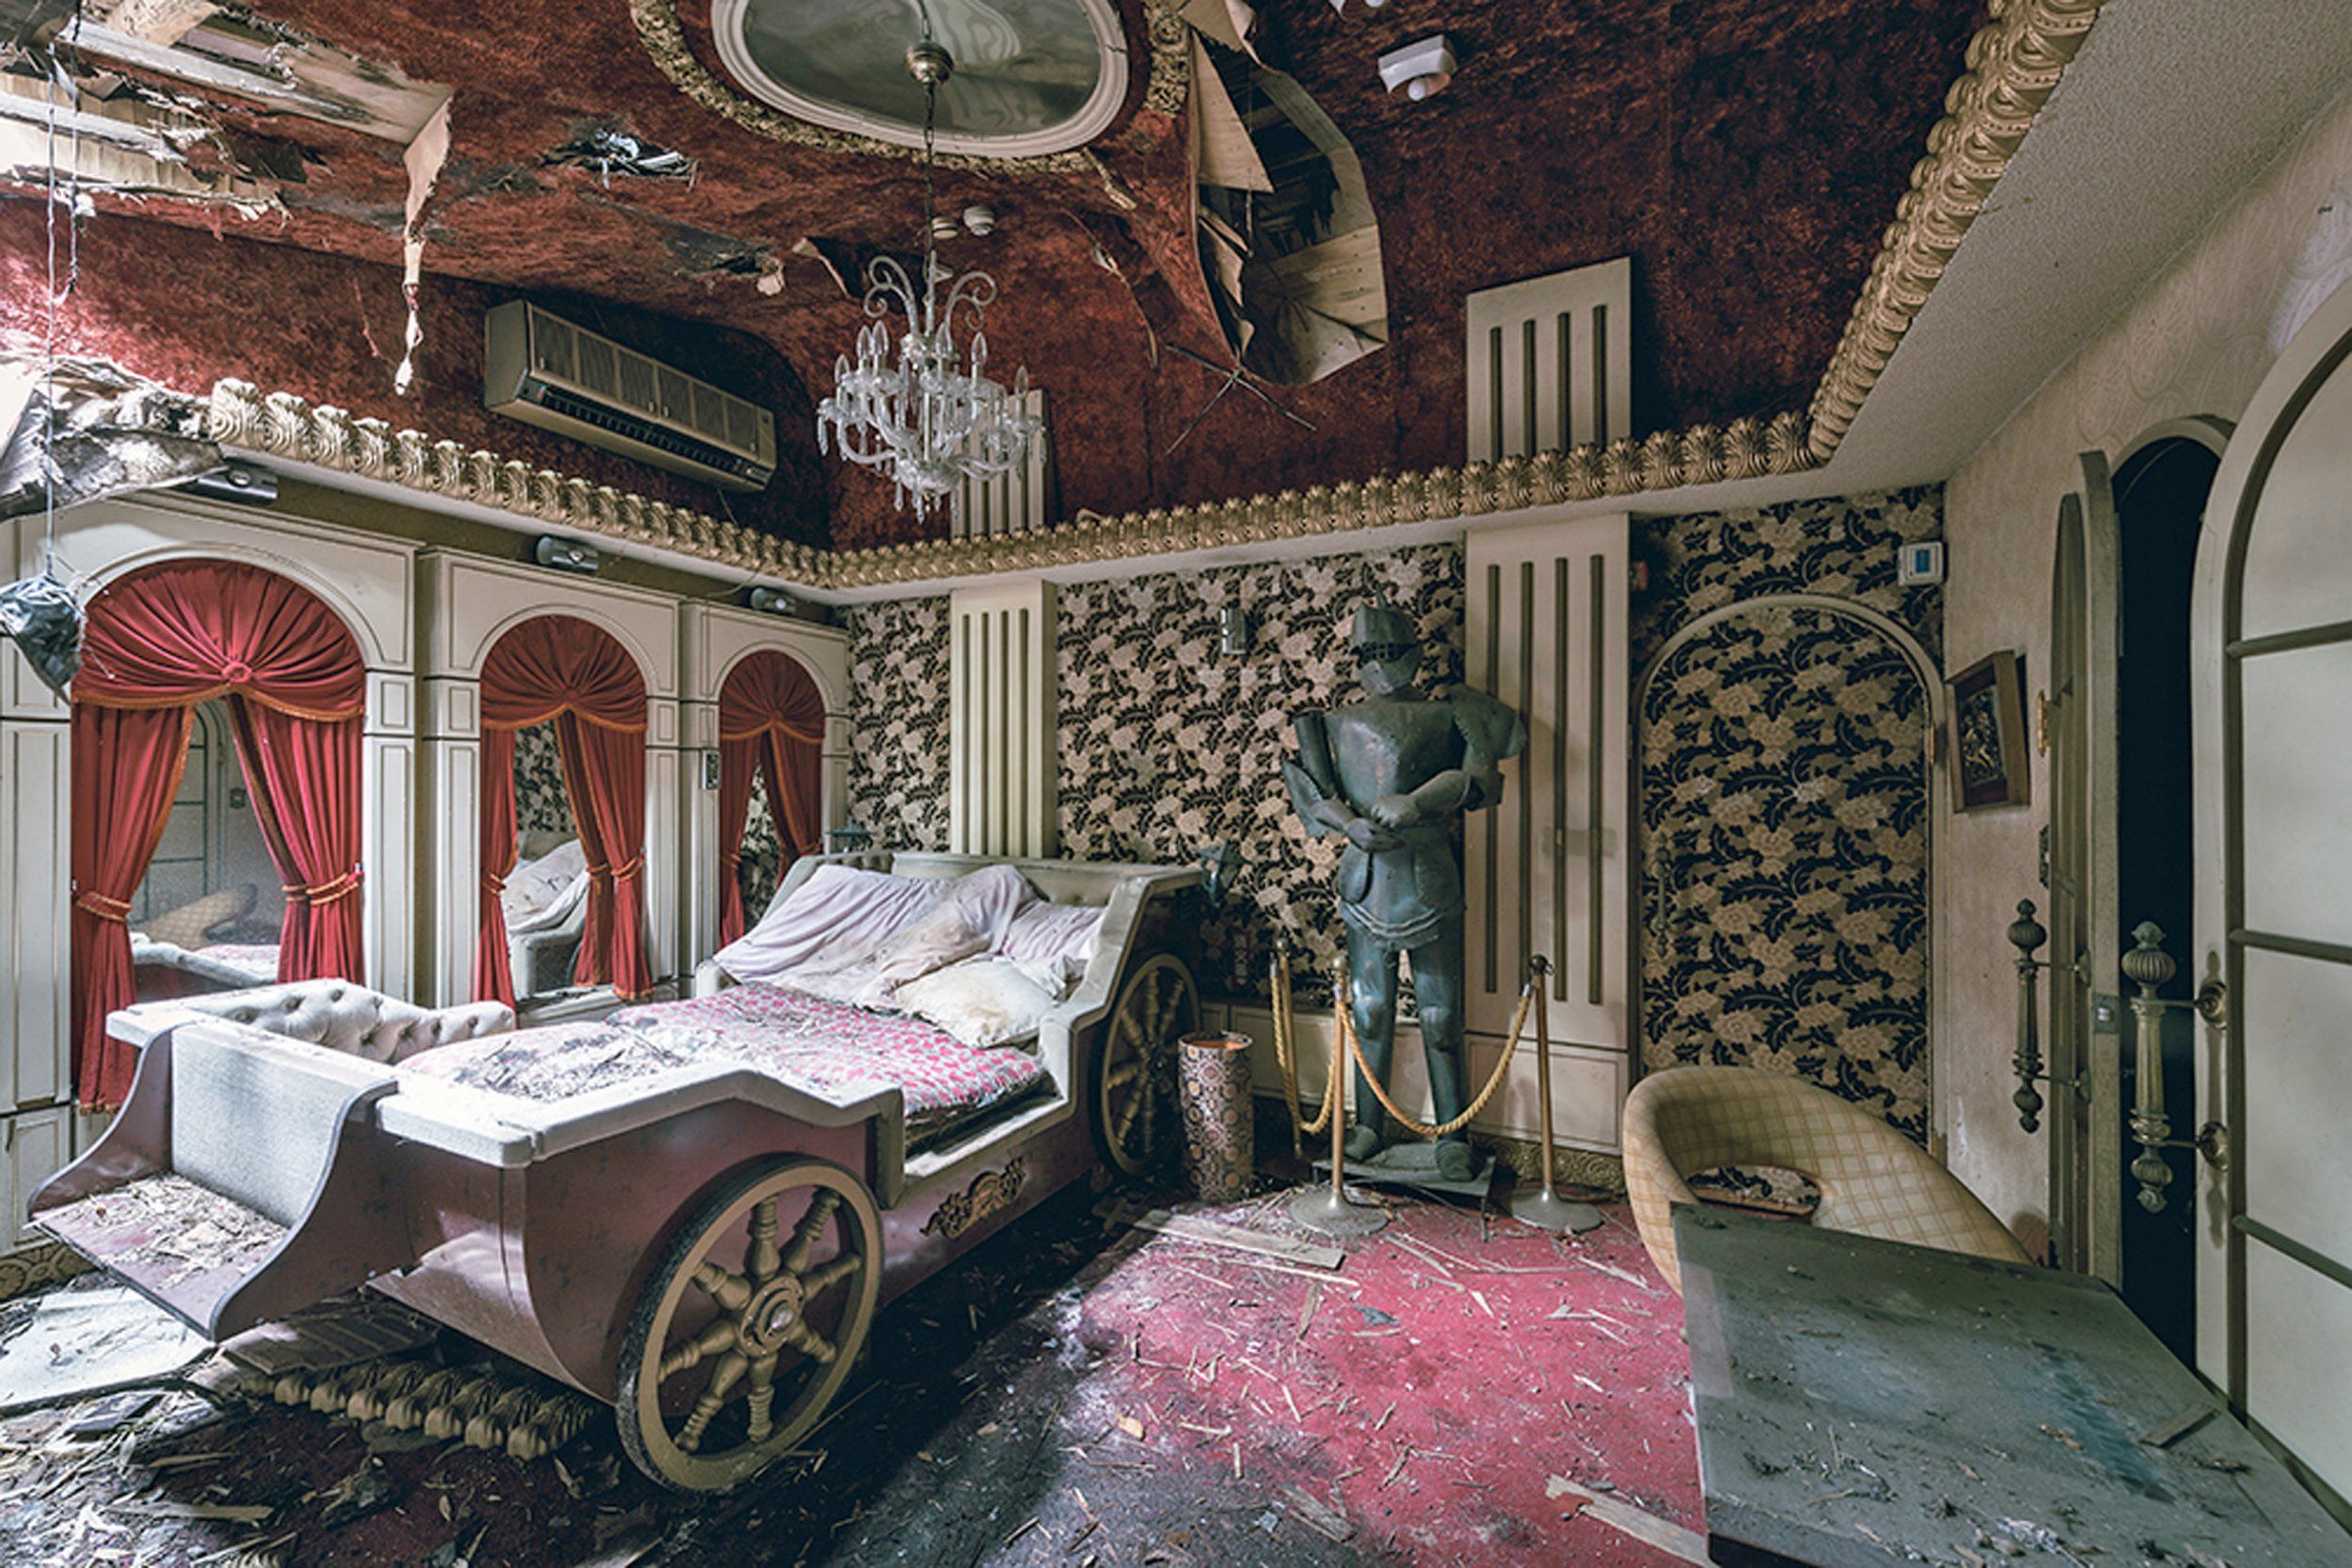 Take A Look Inside An Abandoned Love Hotel in Japan - Creepy Gallery